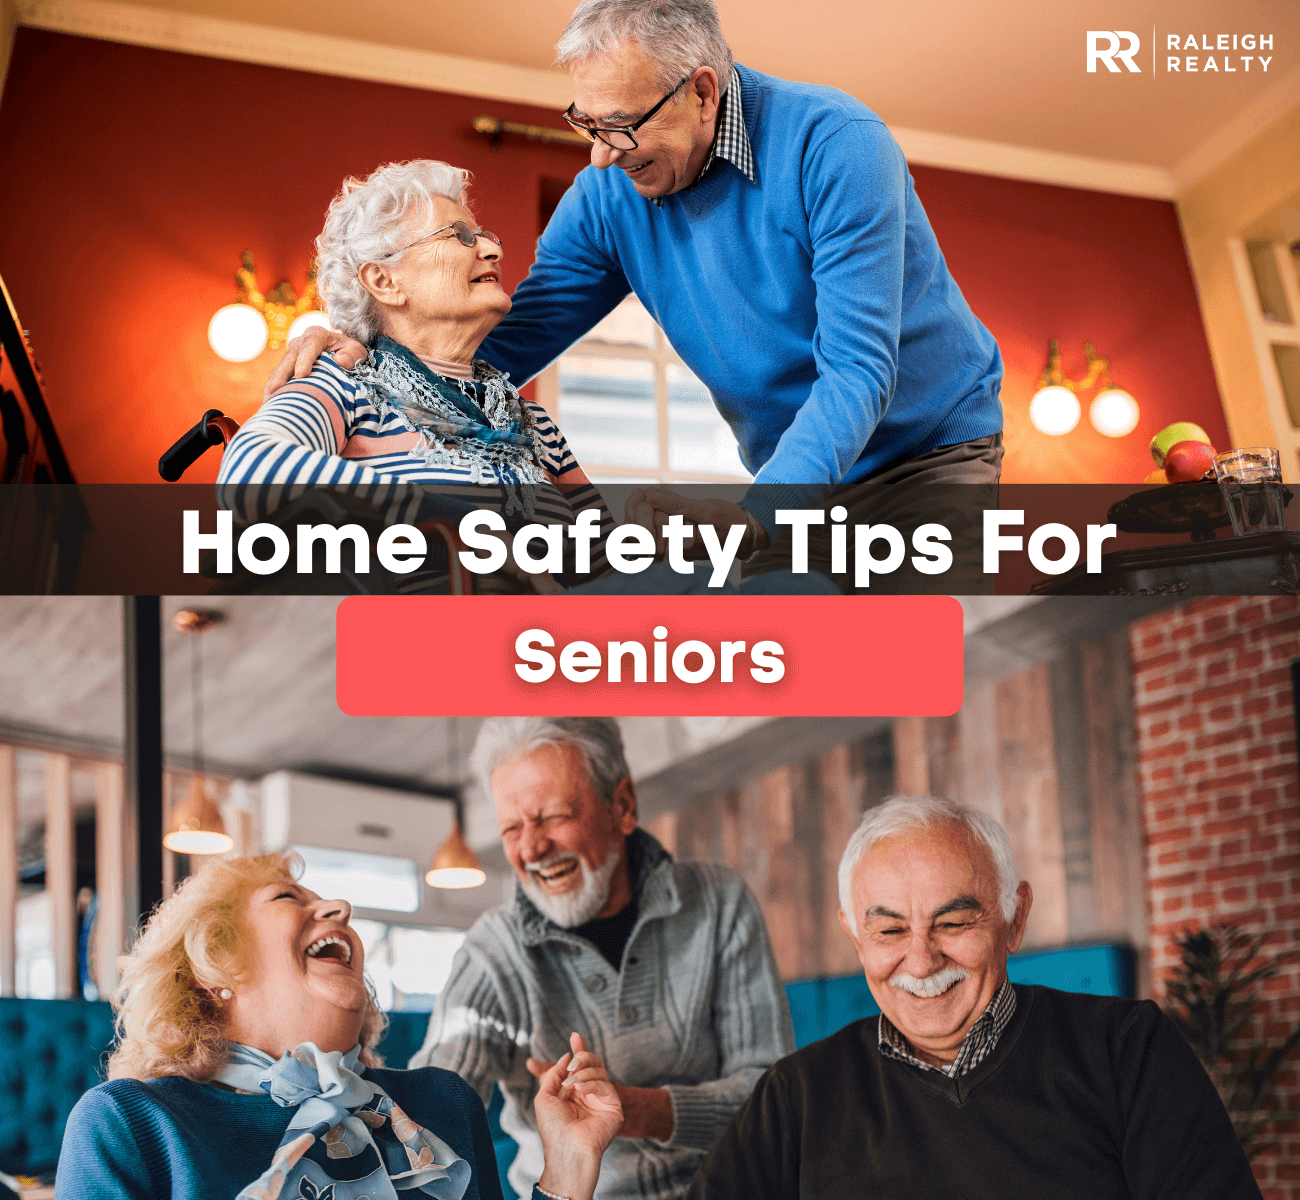 Home Safety Tips for Seniors and Active Adults when living in their home